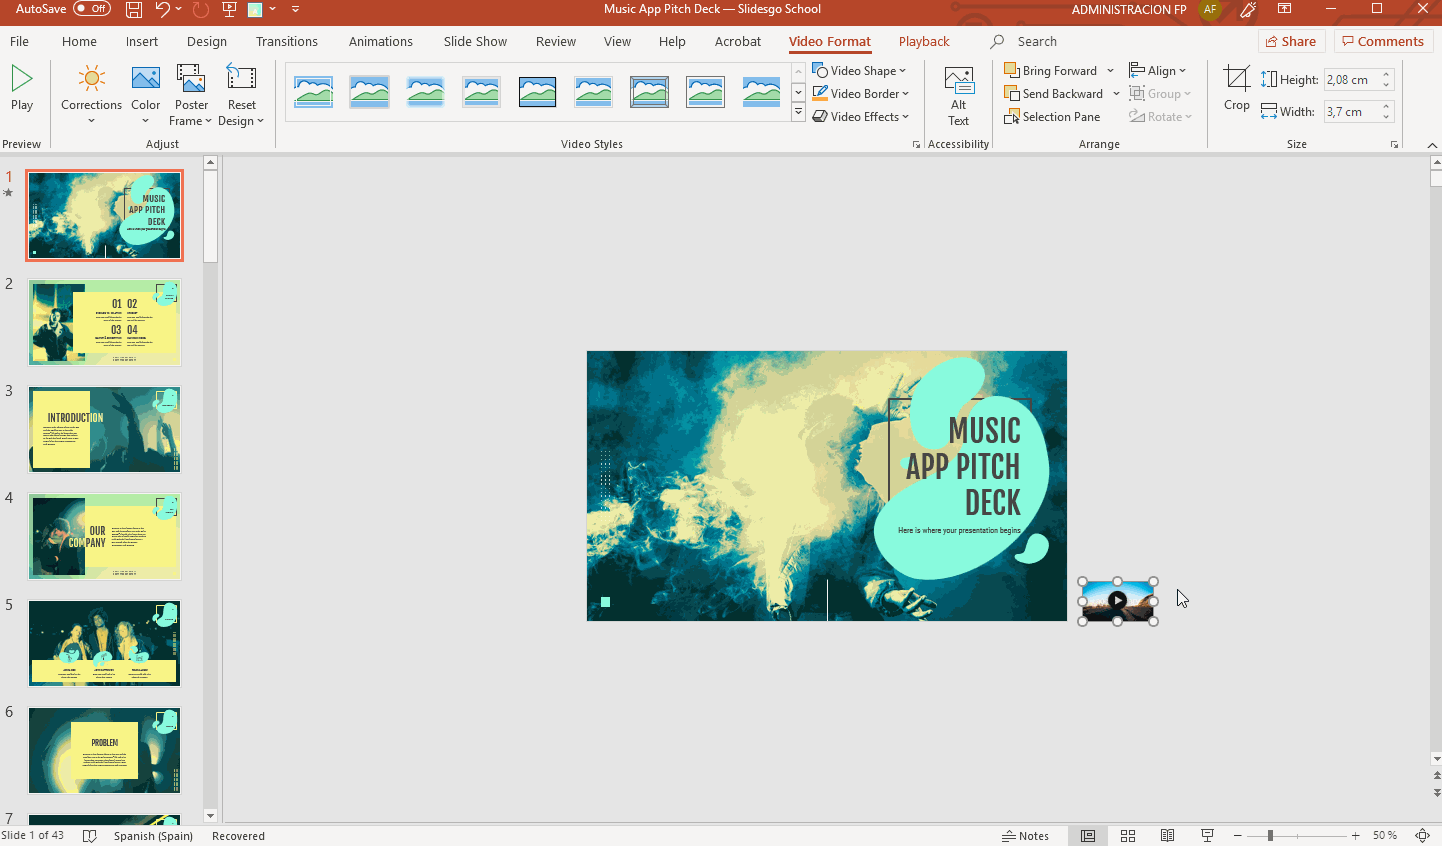 How to Add, Record or Edit Audio or Music in PowerPoint -18